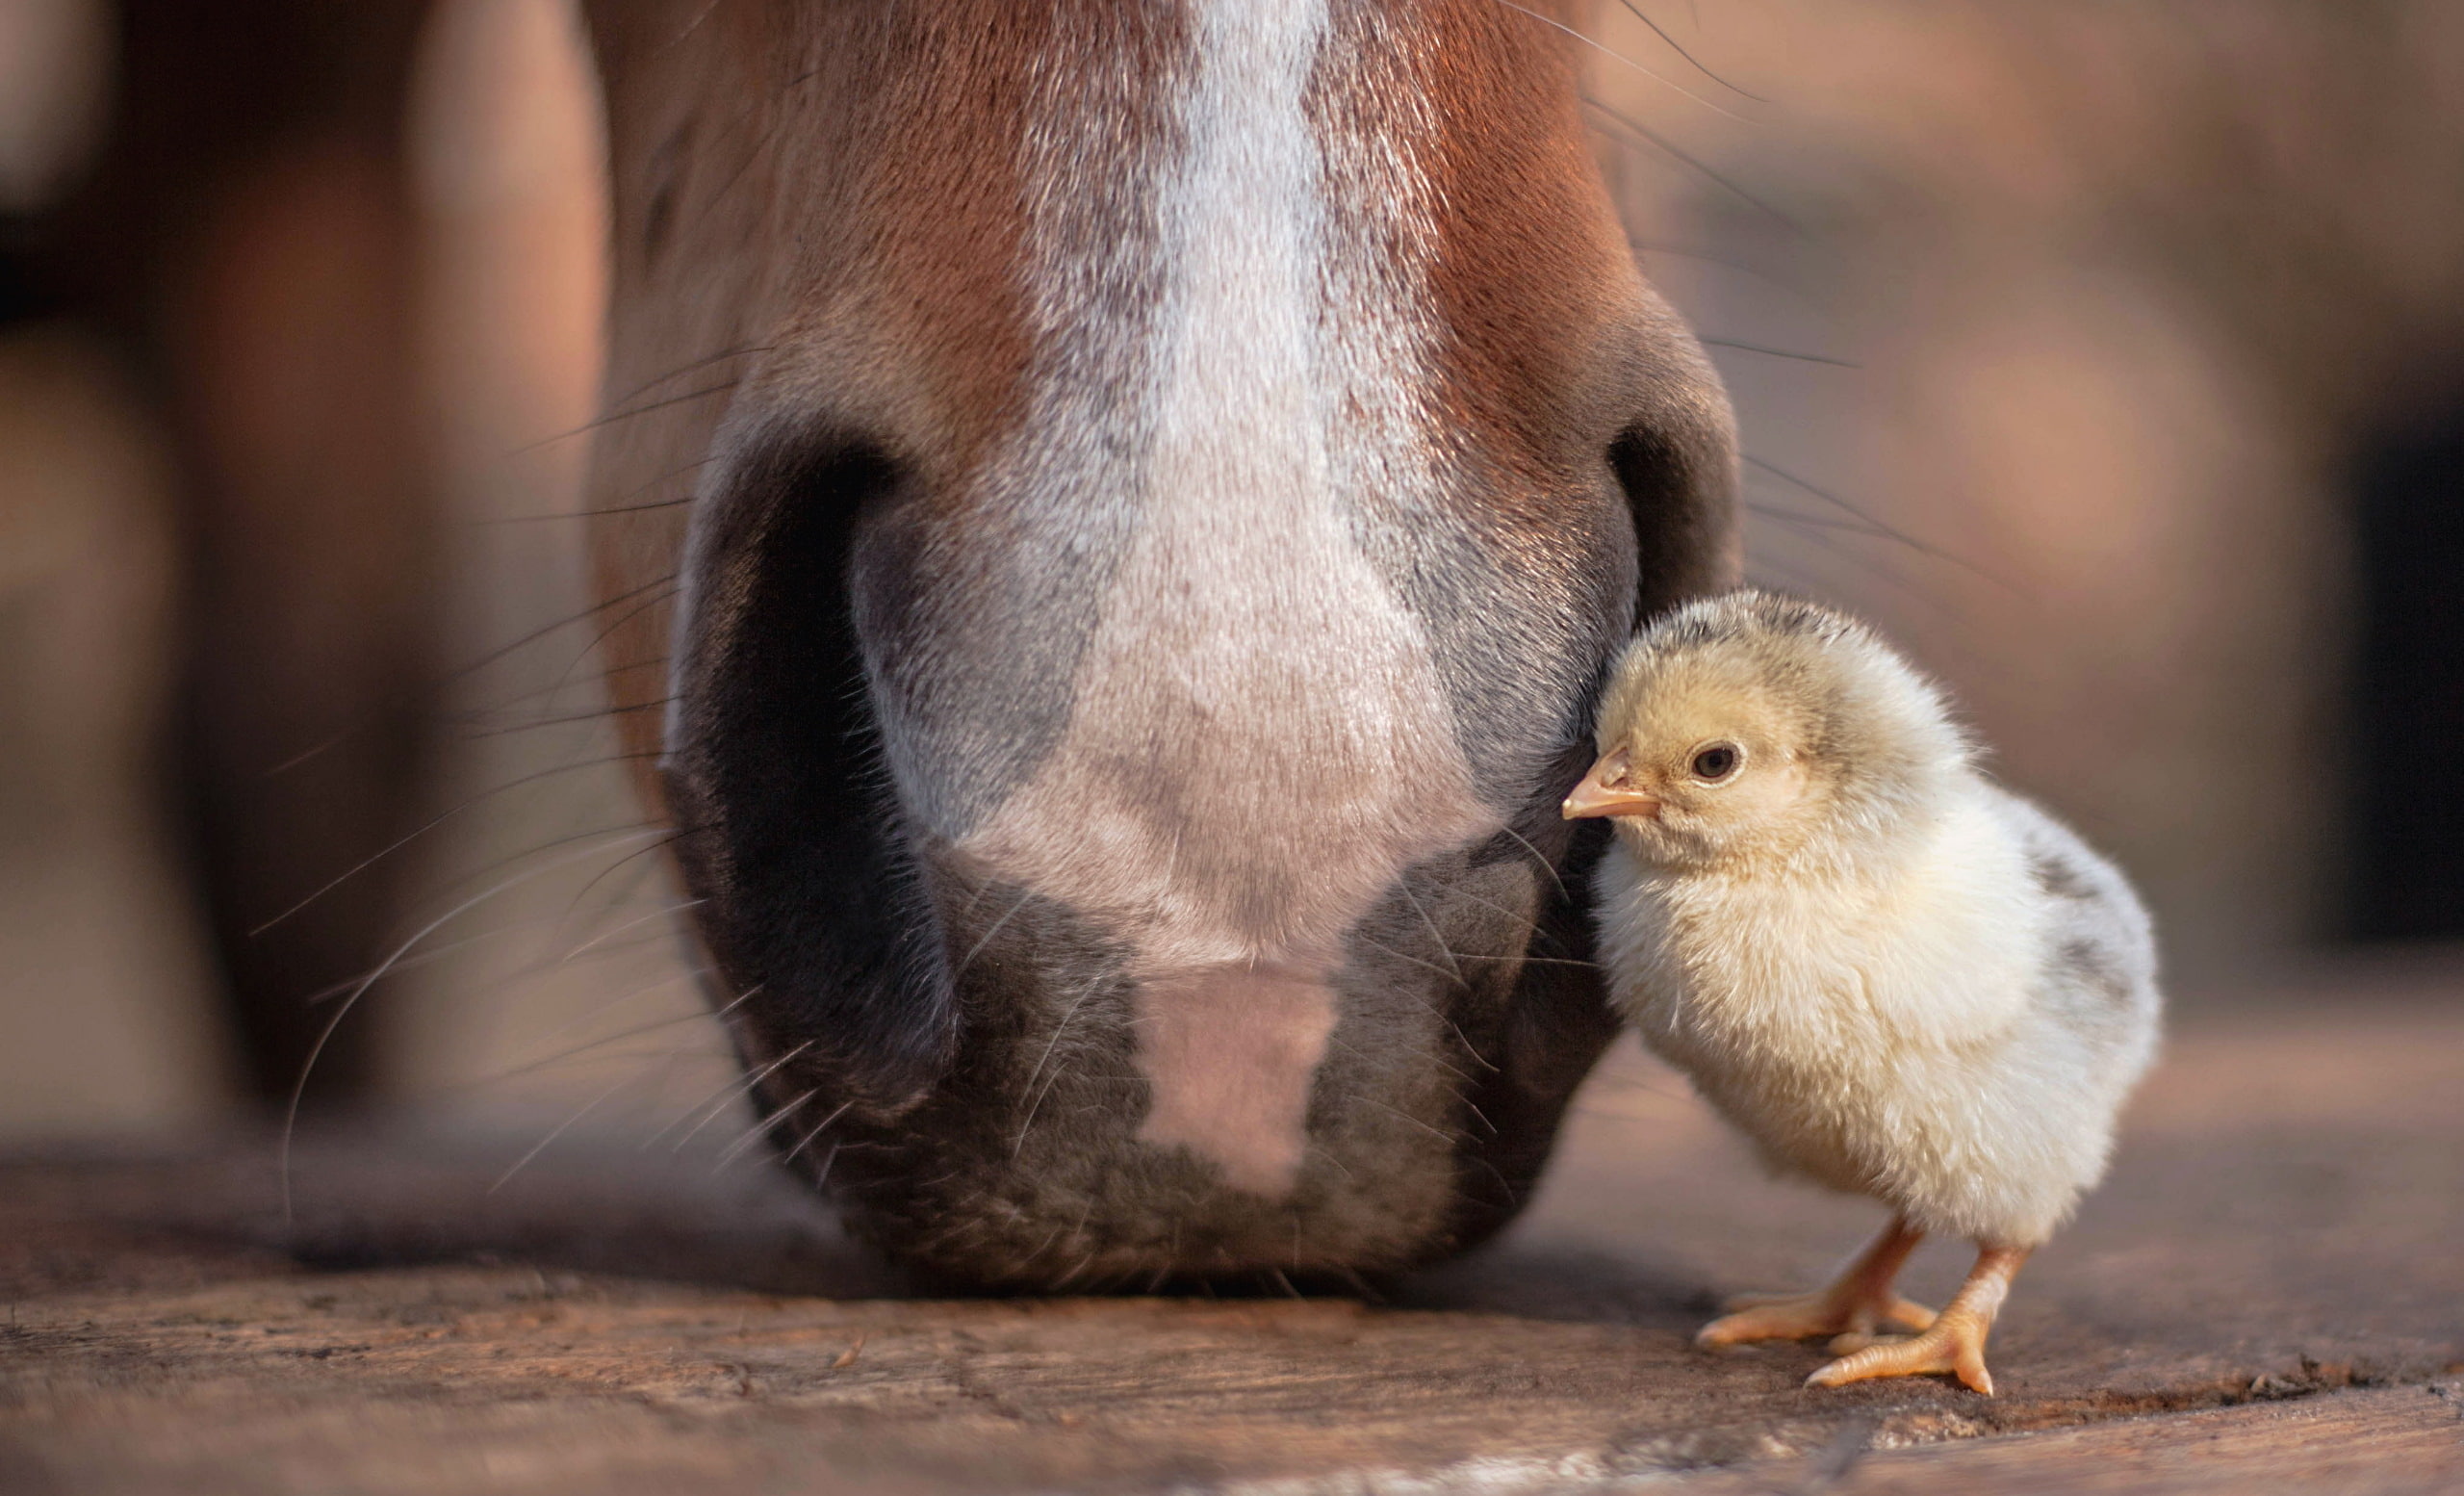 Chicken, baby animals, horse, animal themes, mammal, young animal